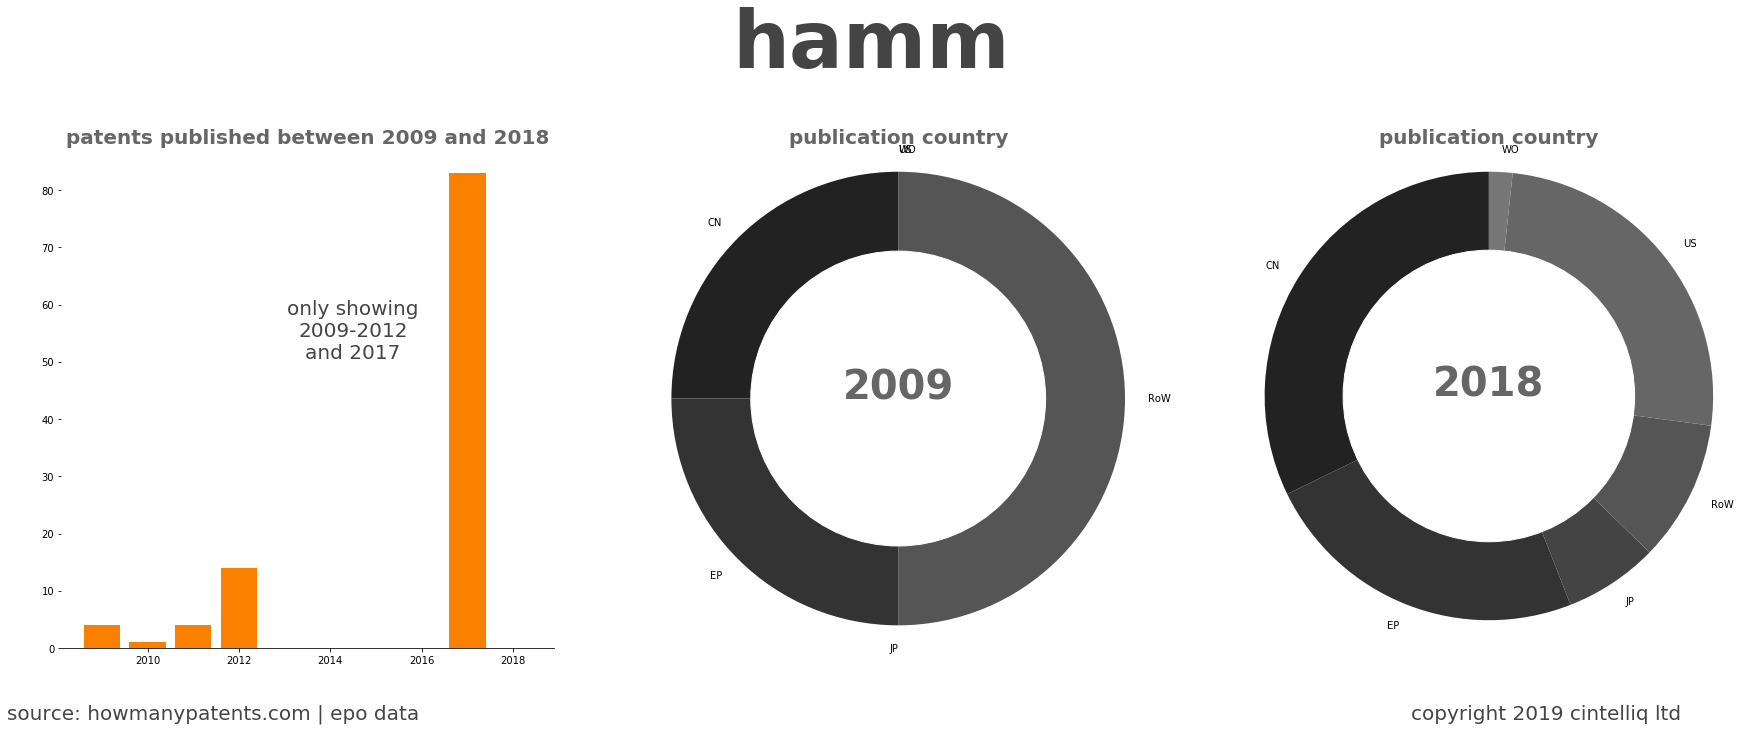 summary of patents for Hamm